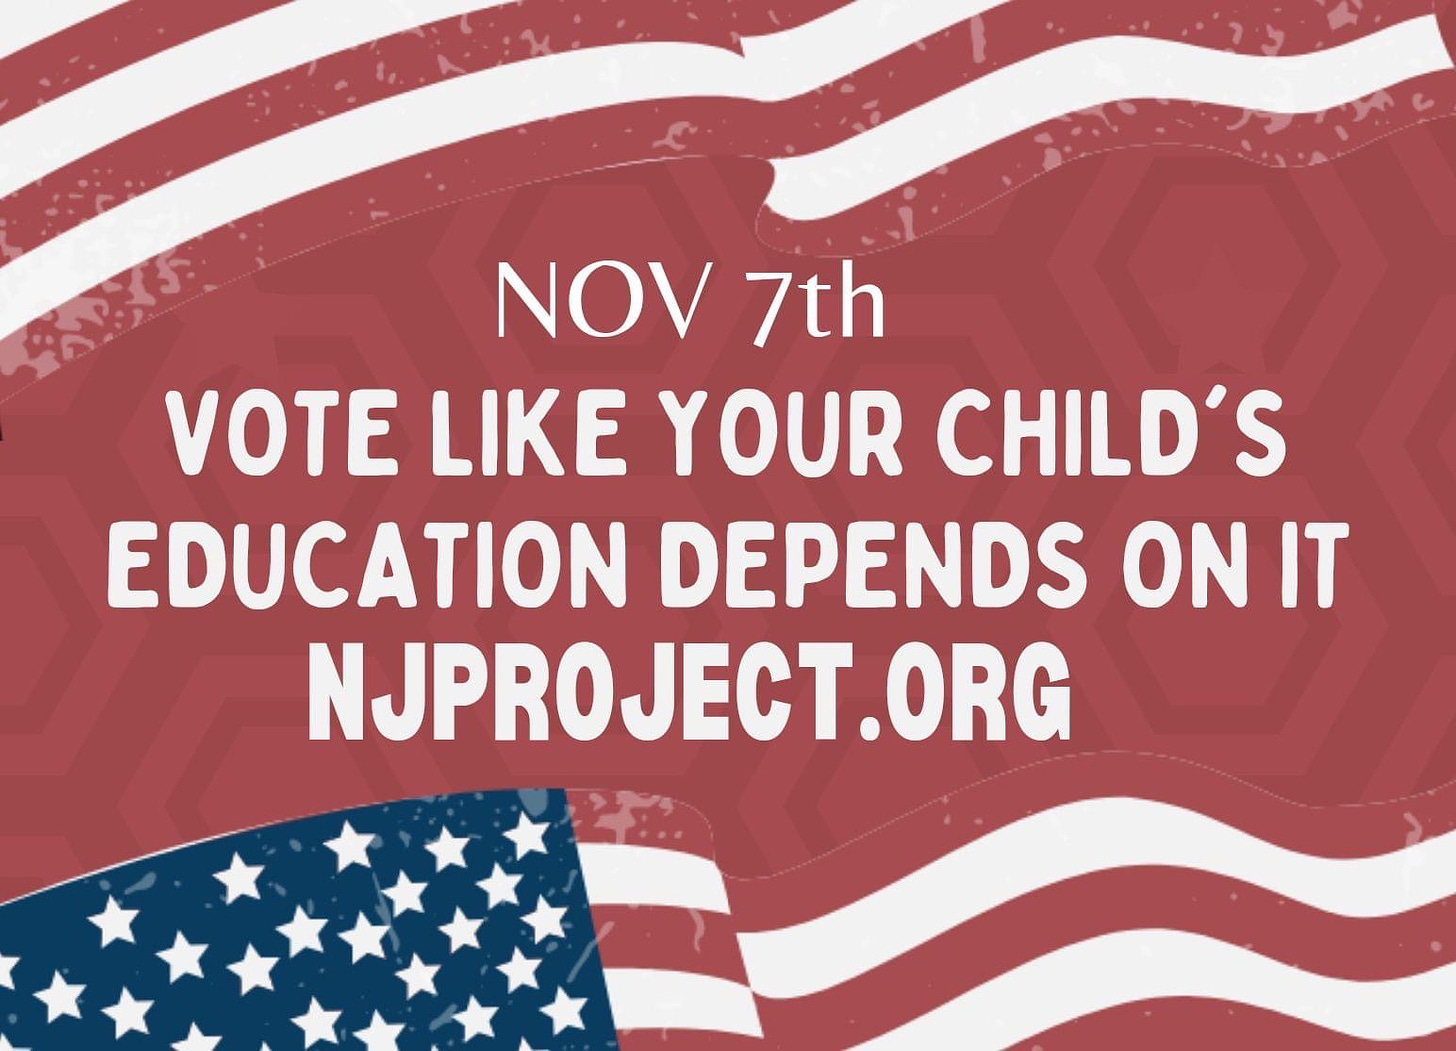 May be an image of child and text that says 'NOV 7th VOTE LIKE YOUR CHILD'S EDUCATION DEPENDS ON IT NJPROJECT.ORG'